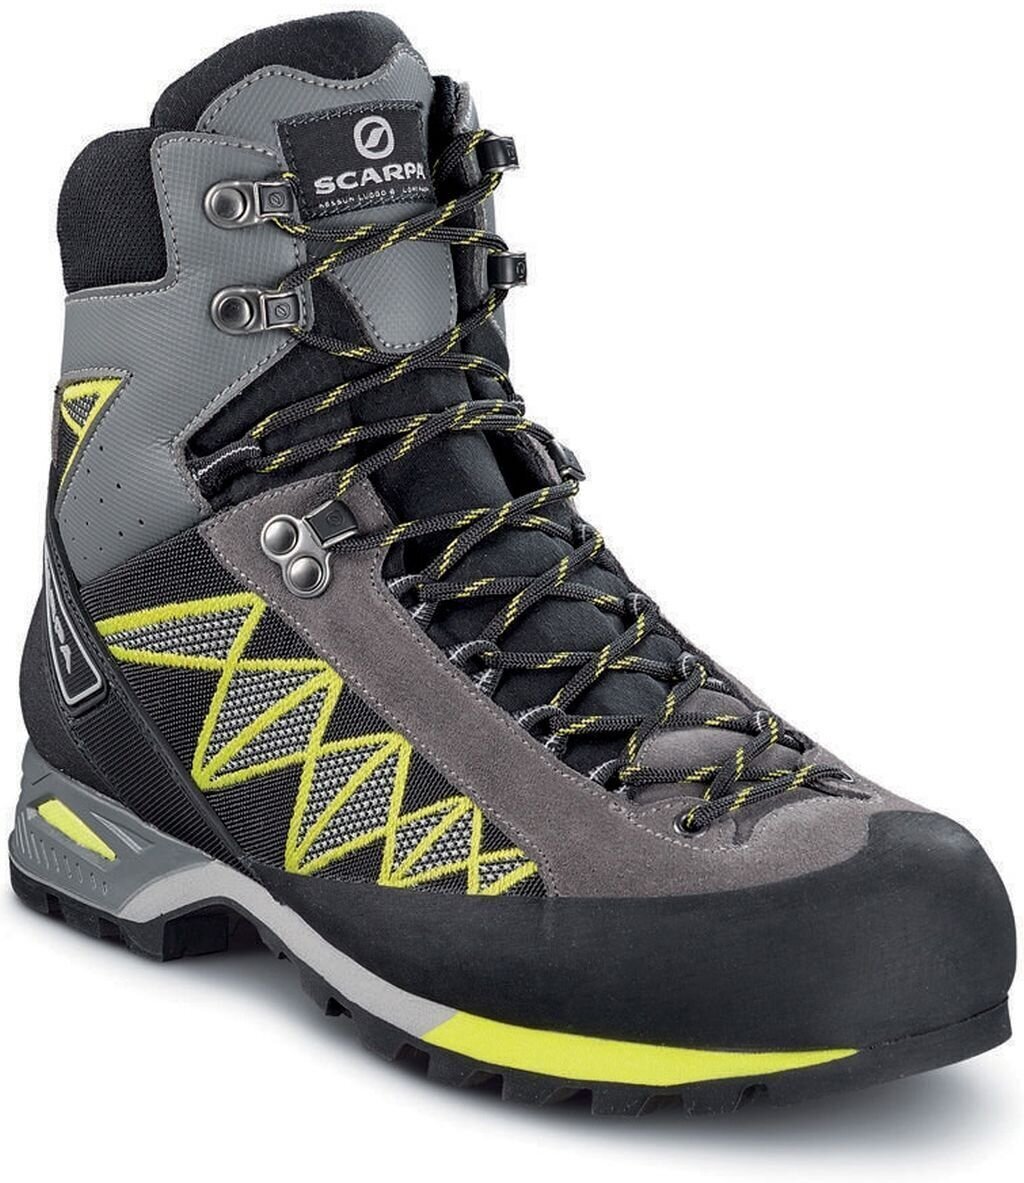 Chaussures outdoor hommes Scarpa Marmolada Trek OD Titanium 44,5 Chaussures outdoor hommes